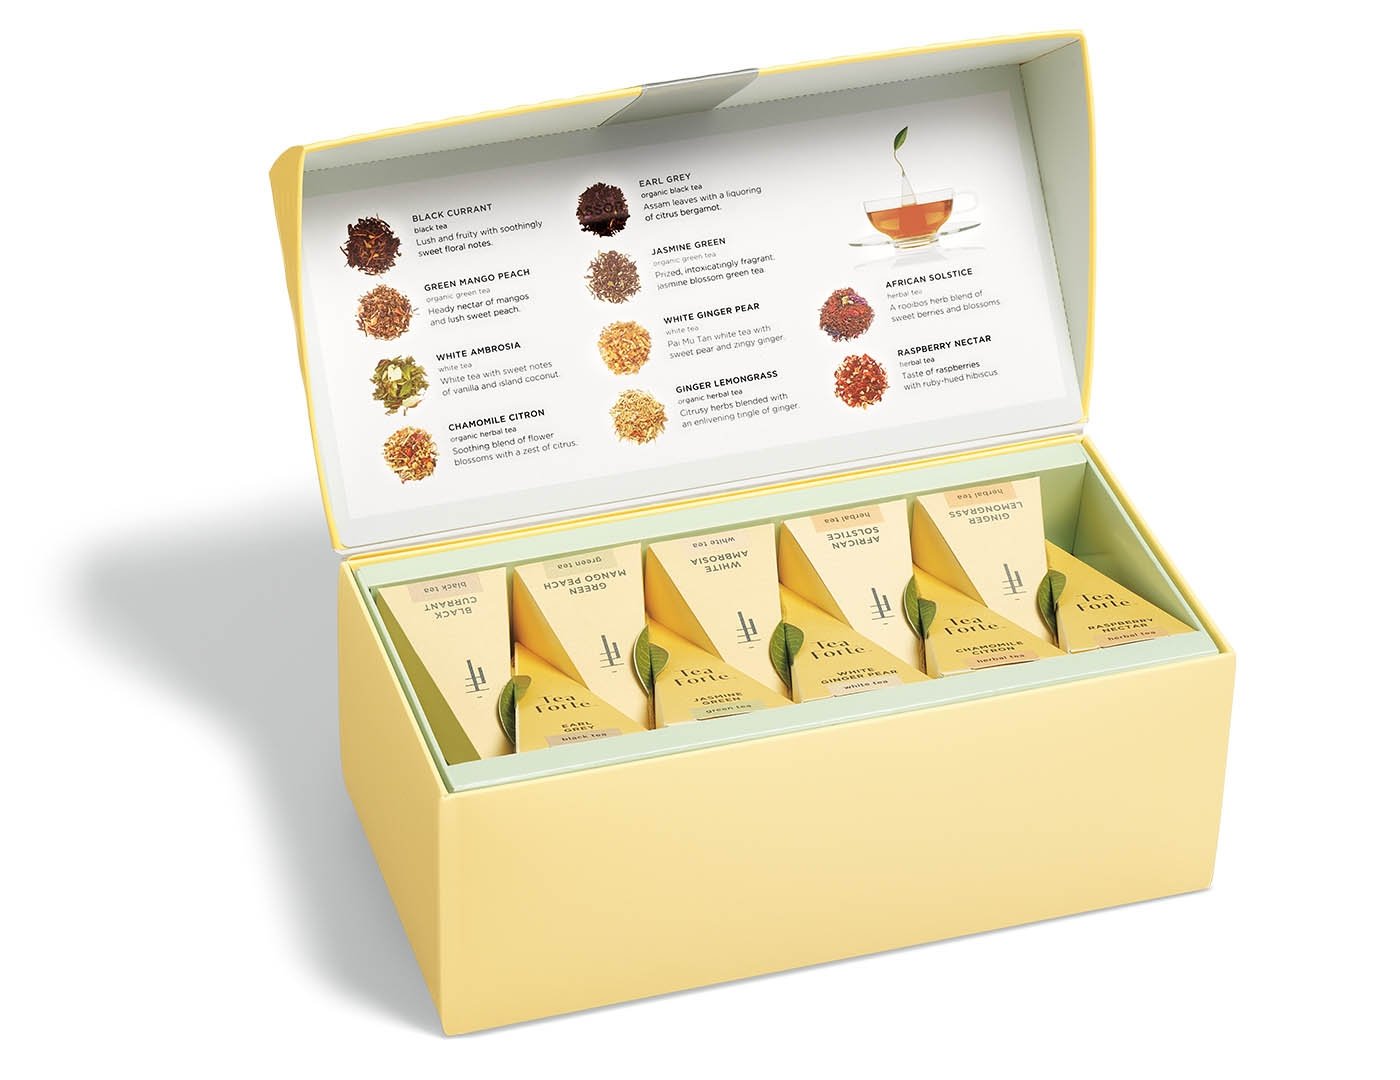 Tea Tasting tea assortment in a 20 count presentation box with lid open